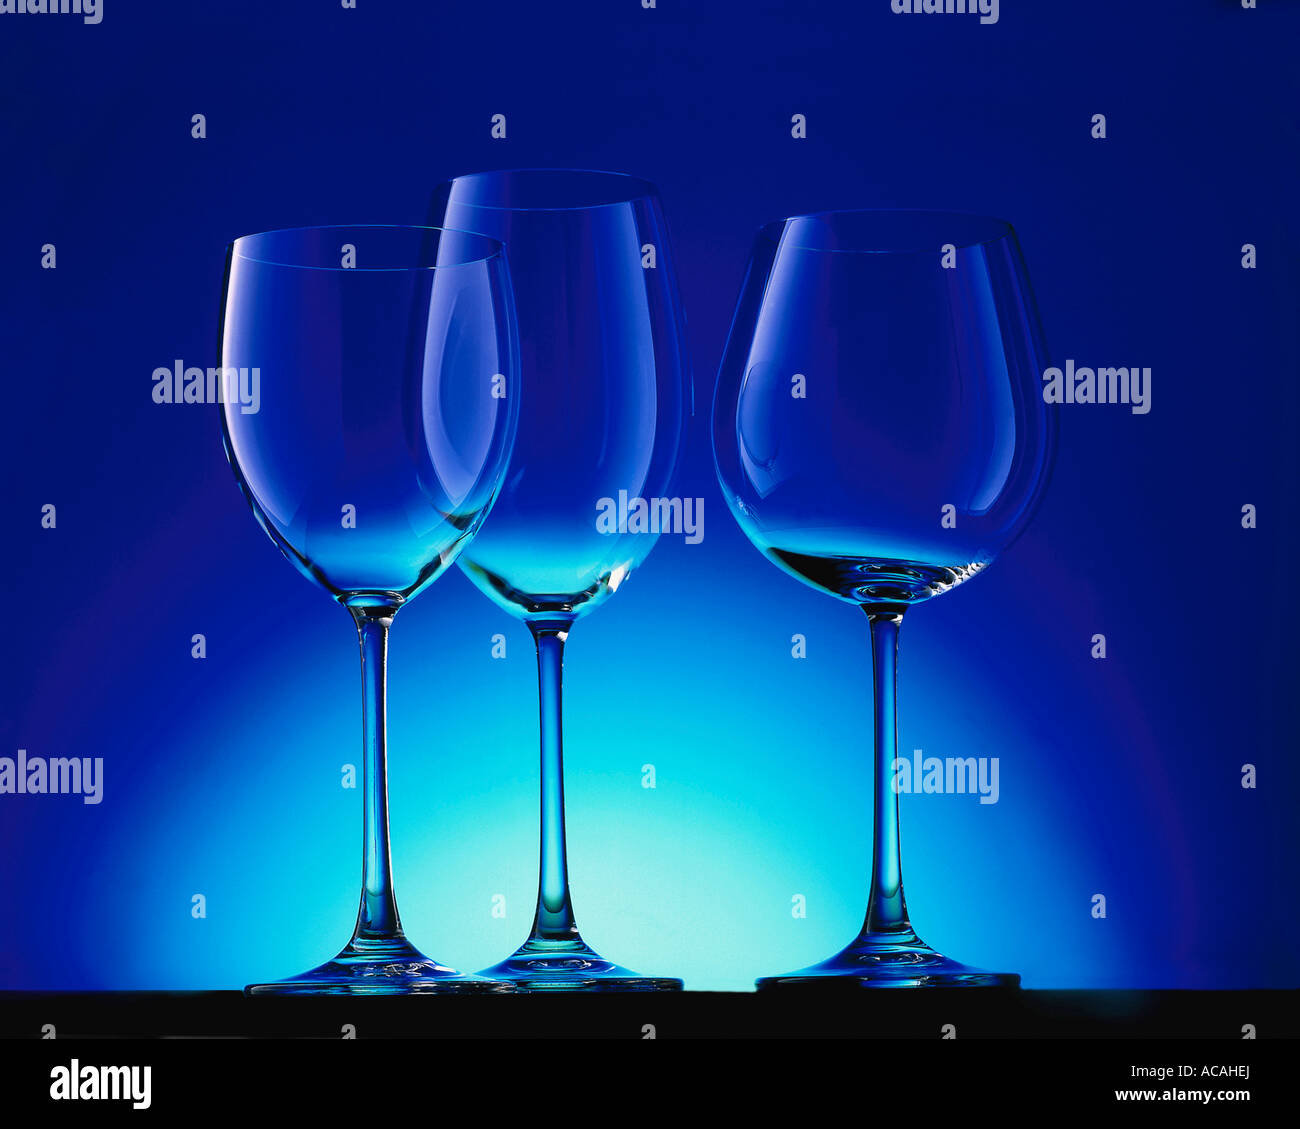 Tree glasses for different wines Stock Photo